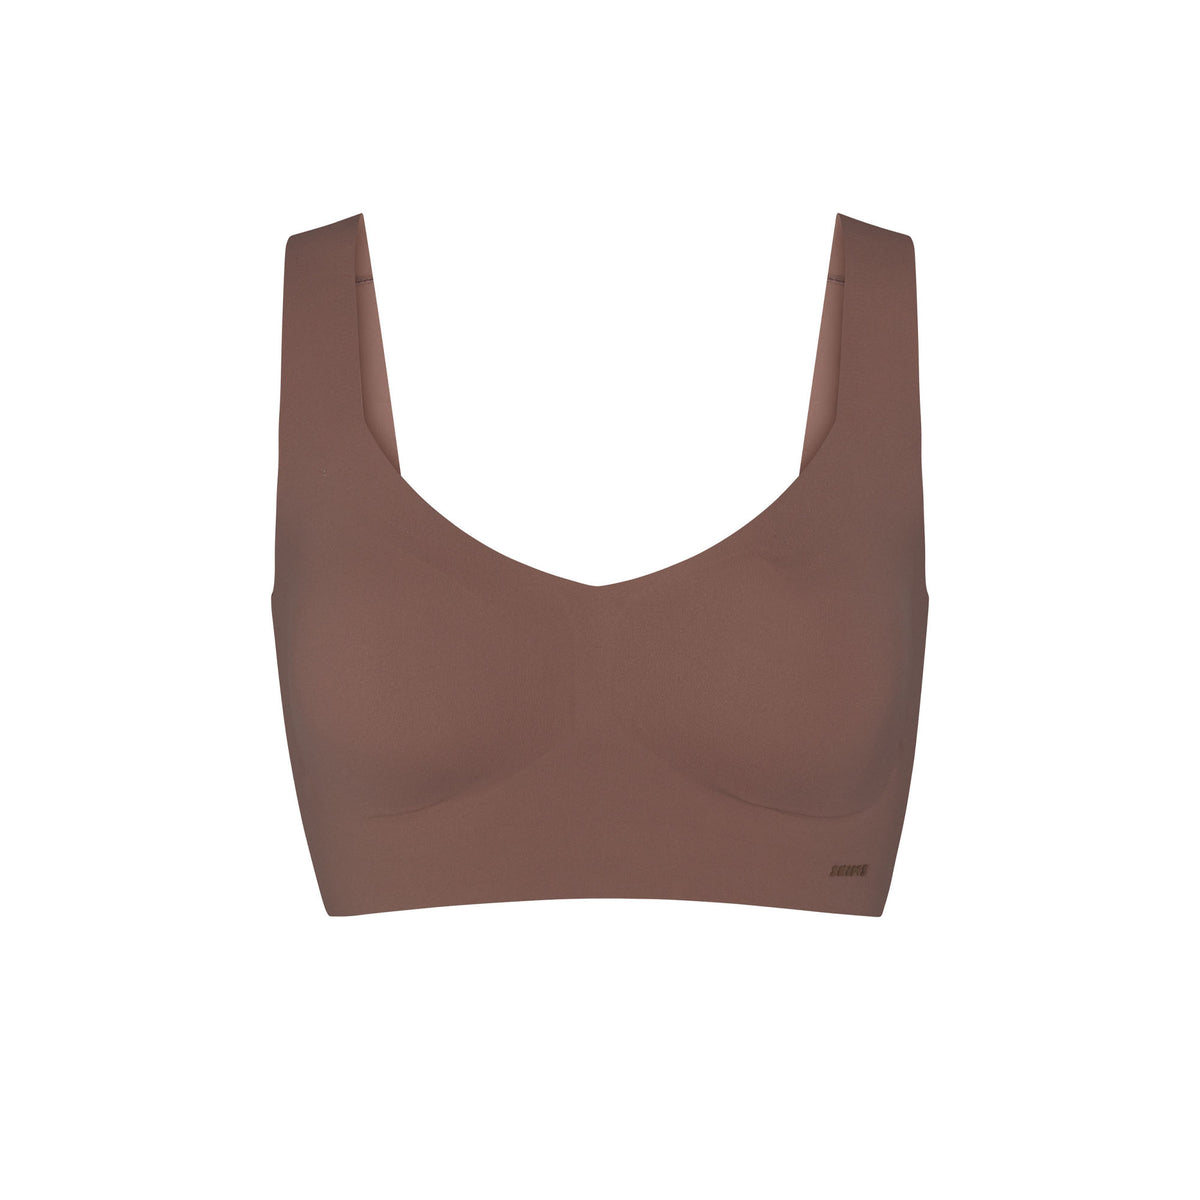 SKIMS Womens Tan Bra Sz Sz Lin great conditionno holes or  spotscomes from a smoke free home Size L - $35 - From Brooke